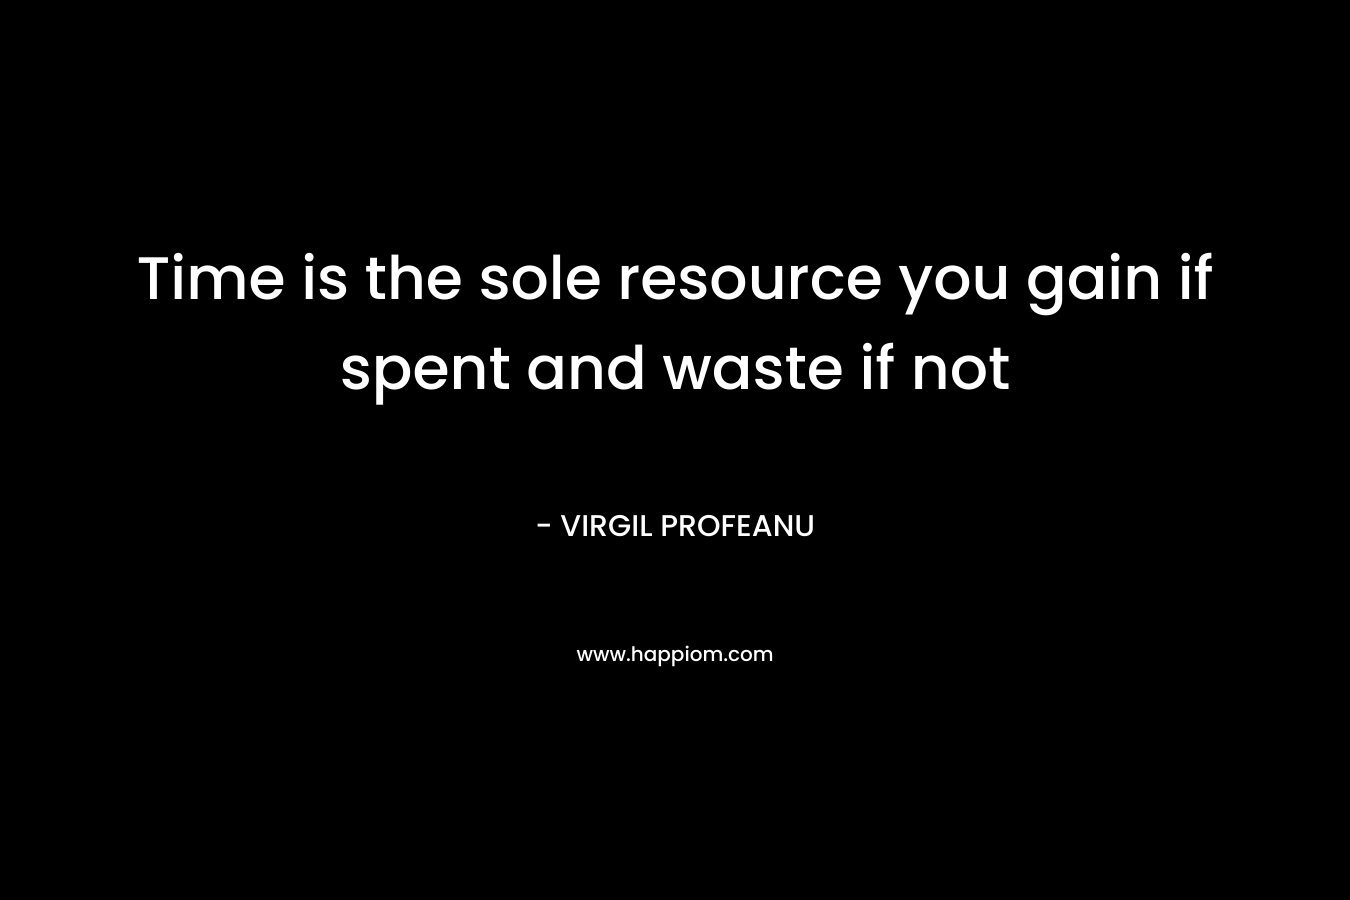 Time is the sole resource you gain if spent and waste if not